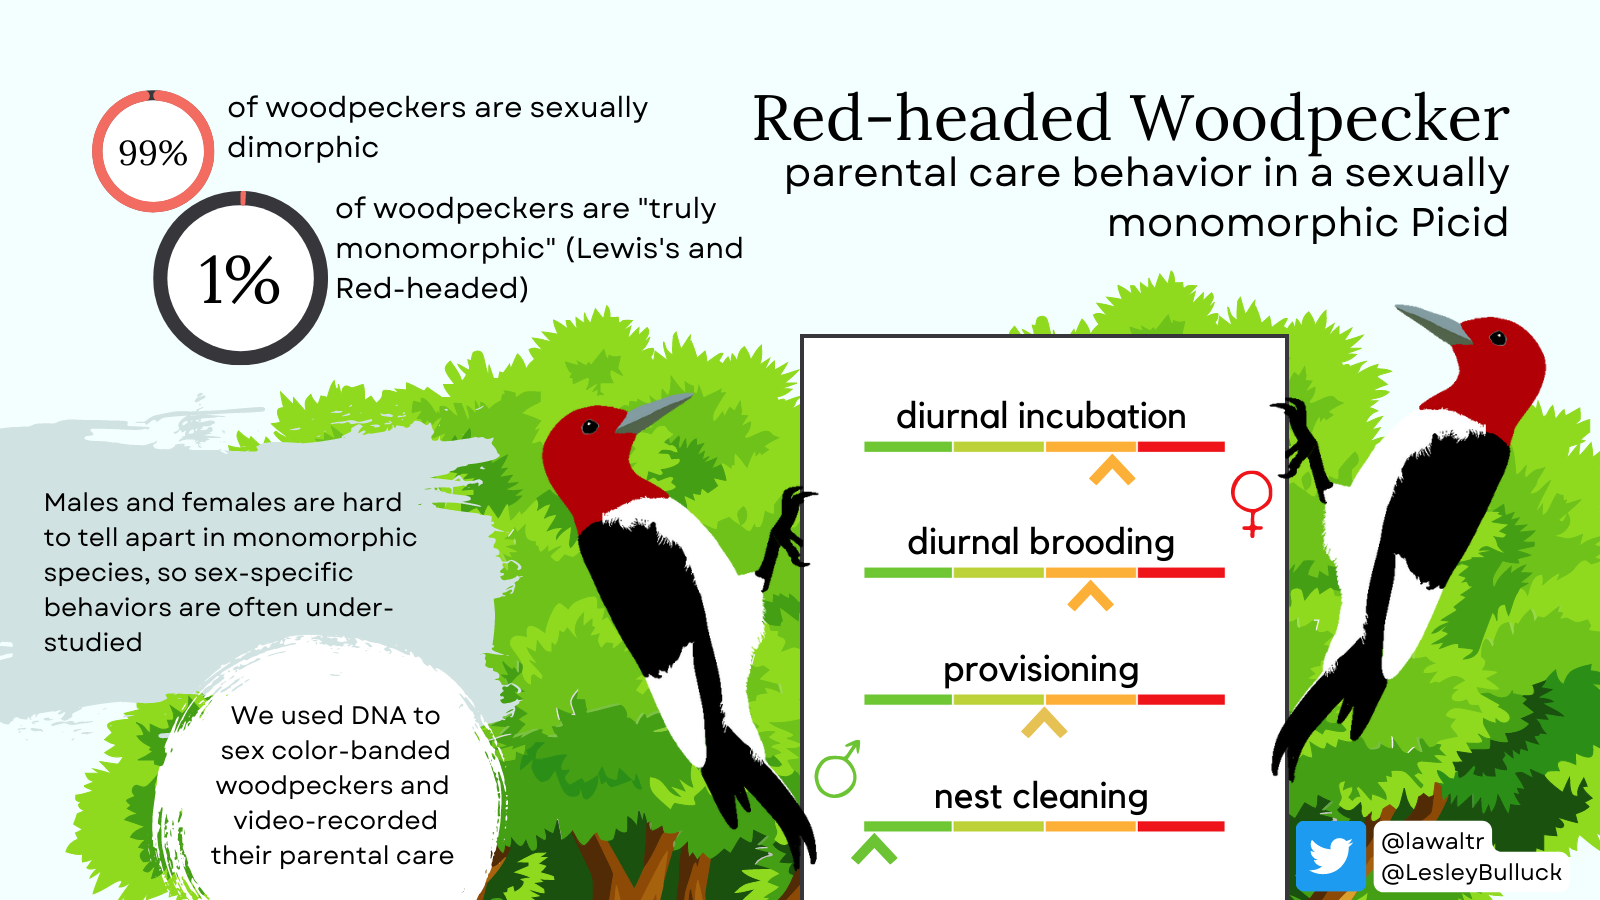 Red-headed Woodpecker parental care results summary. Ninety-nine percent of all woodpecker species are sexually dimorphic; less than one percent are truly monomorphic. Red-headed and Lewis's Woodpeckers are the only monomorphic woodpeckers. Since males and females are hard to tell apart in monomorphic species, parental care behaviors are often under-studied. We used DNA to sex color-banded Red-headed Woodpeckers and video-recorded their parental care. Males did nearly all of the nest cleaning. Provisioning, also known as feeding chicks, was equal. Incubation and diurnal brooding was done by females more.